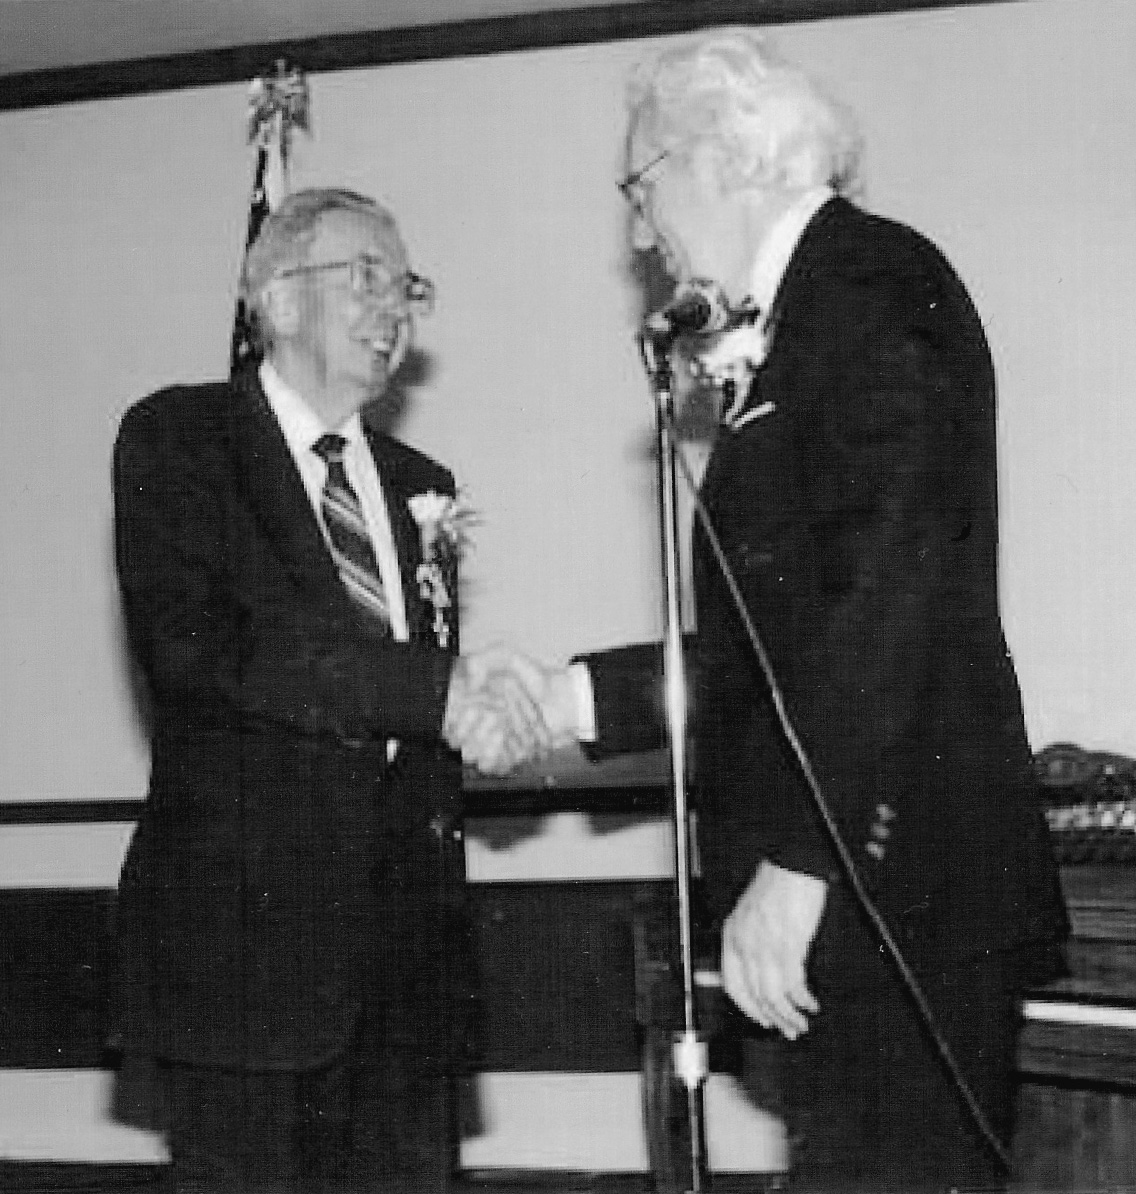 Byron T. Geslison receiving the Order of the Falcon from Tómas Tómasson, the ambassador of Iceland, 1993. Courtesy of David A. Ashby